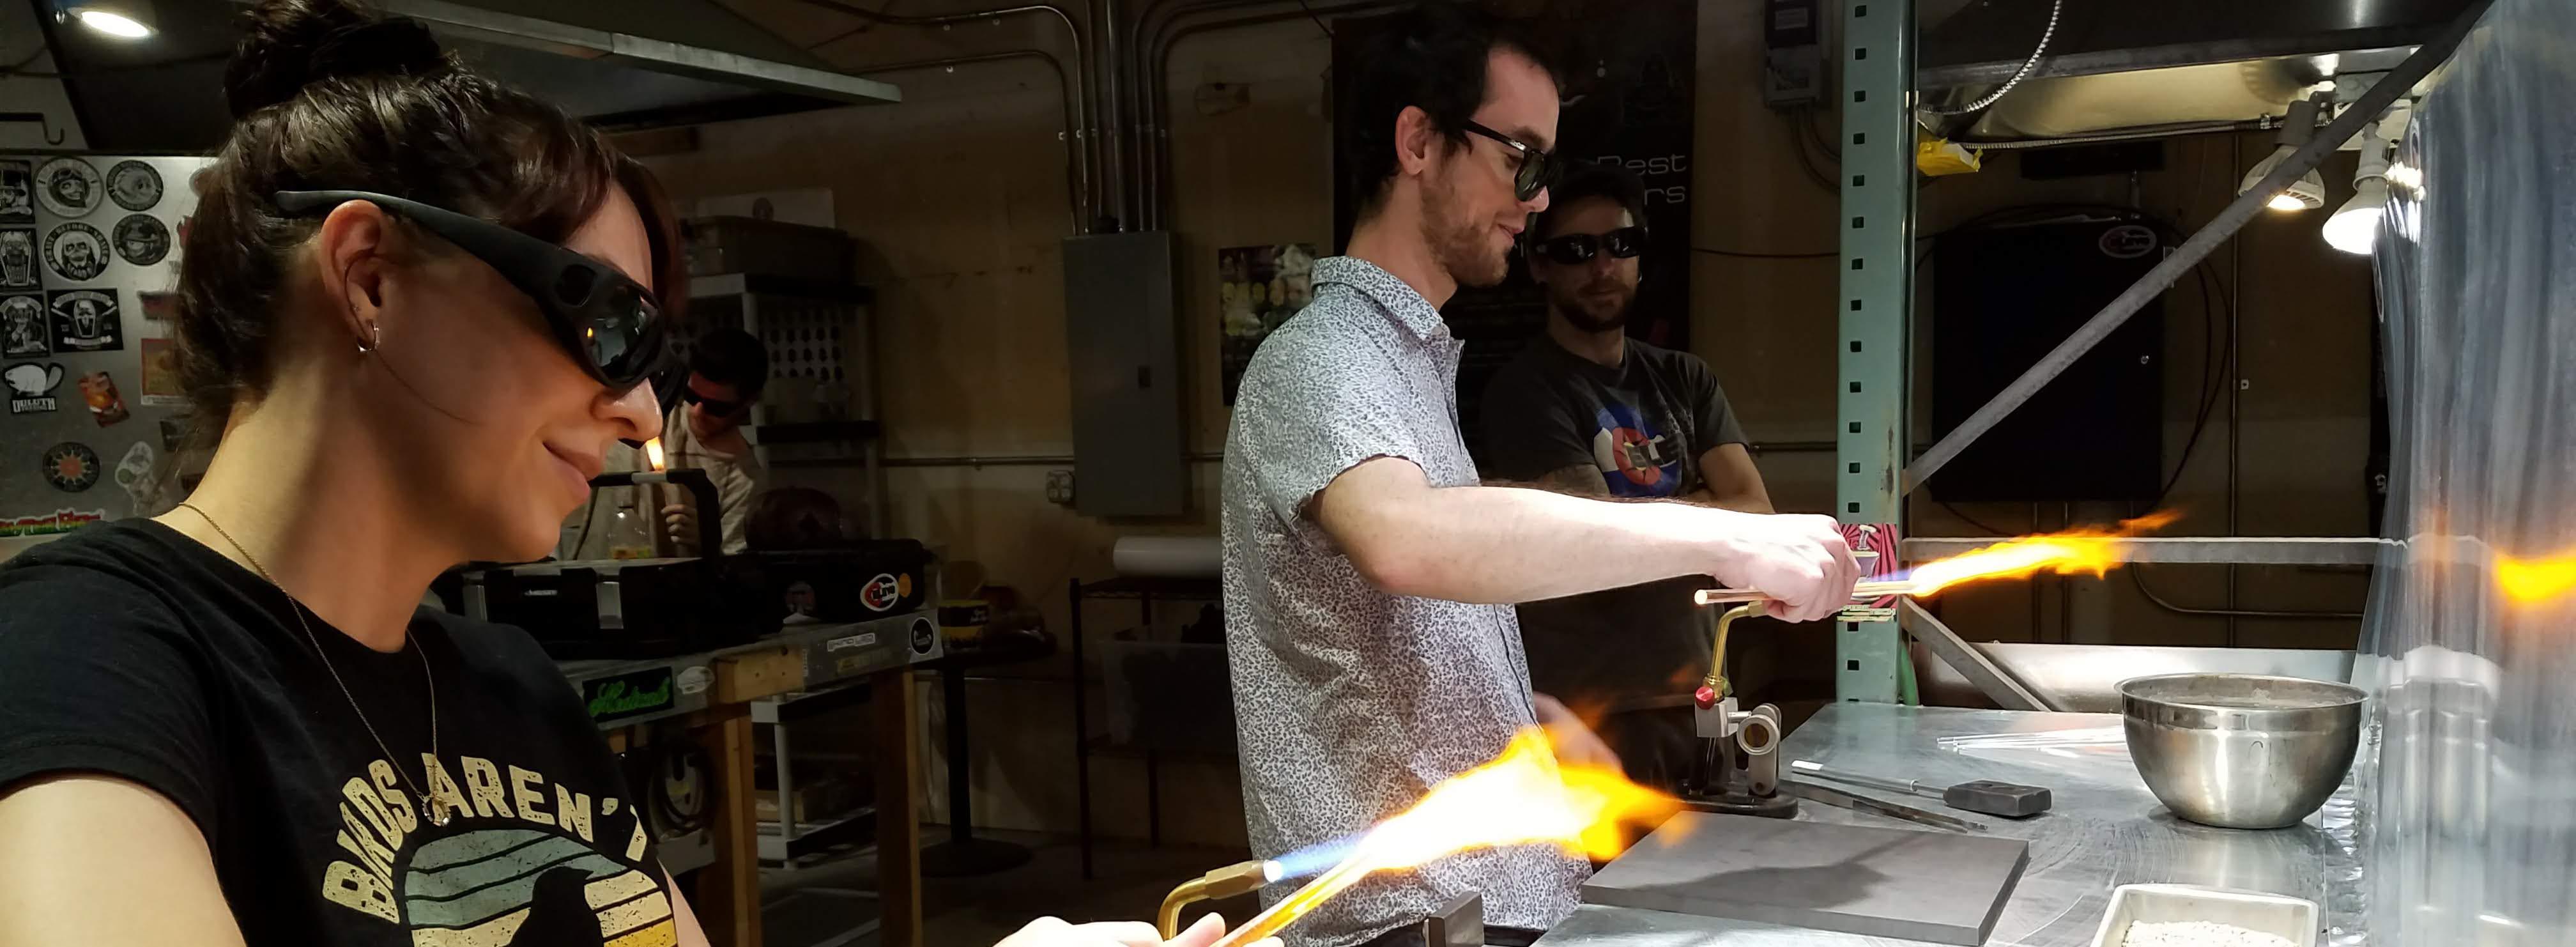 Glass Blowing Classes - GlassBlowing Classes in Colorado Springs